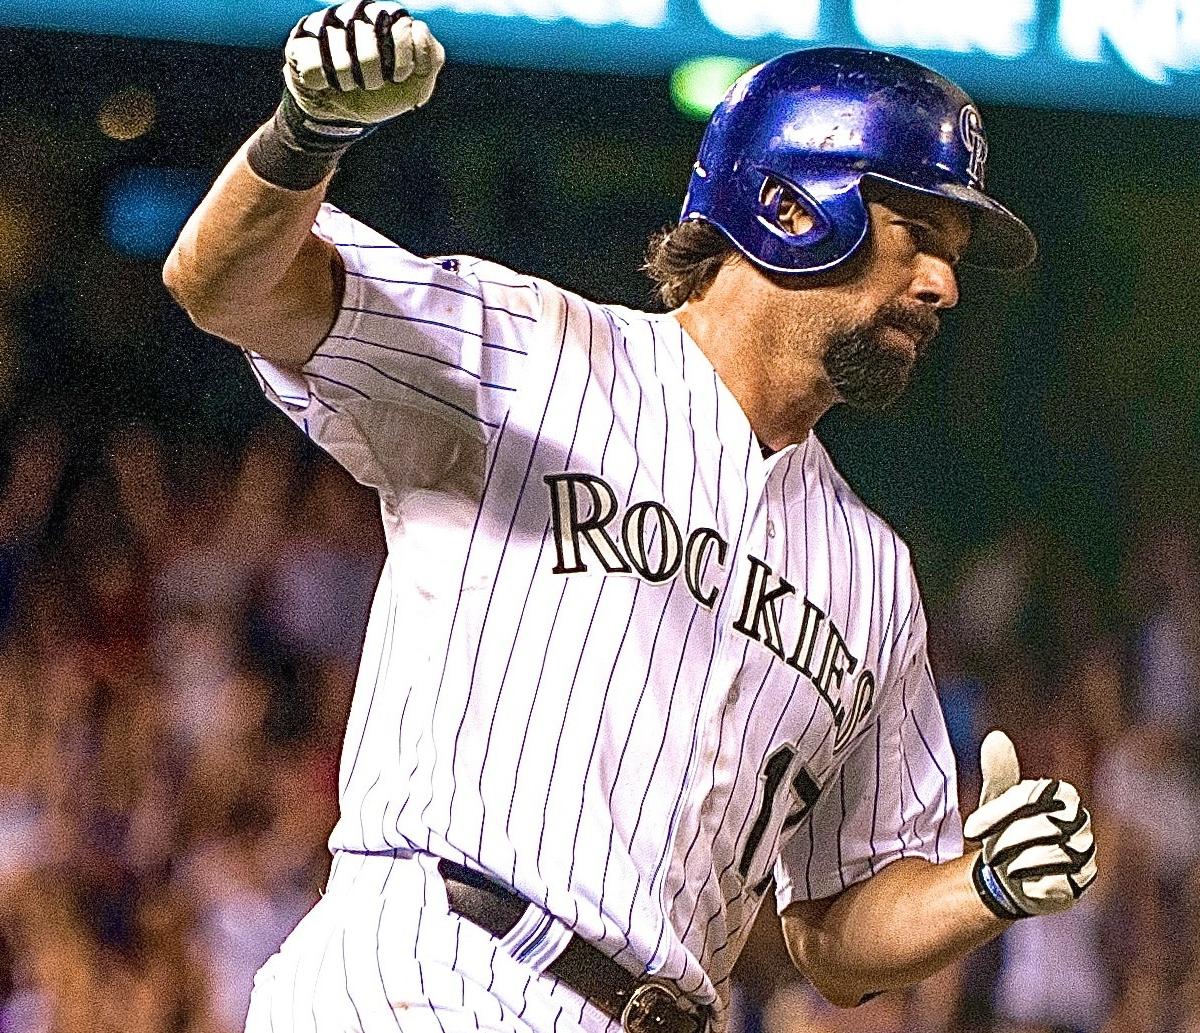 Todd Helton's moment approaches amongst the all-time Colorado